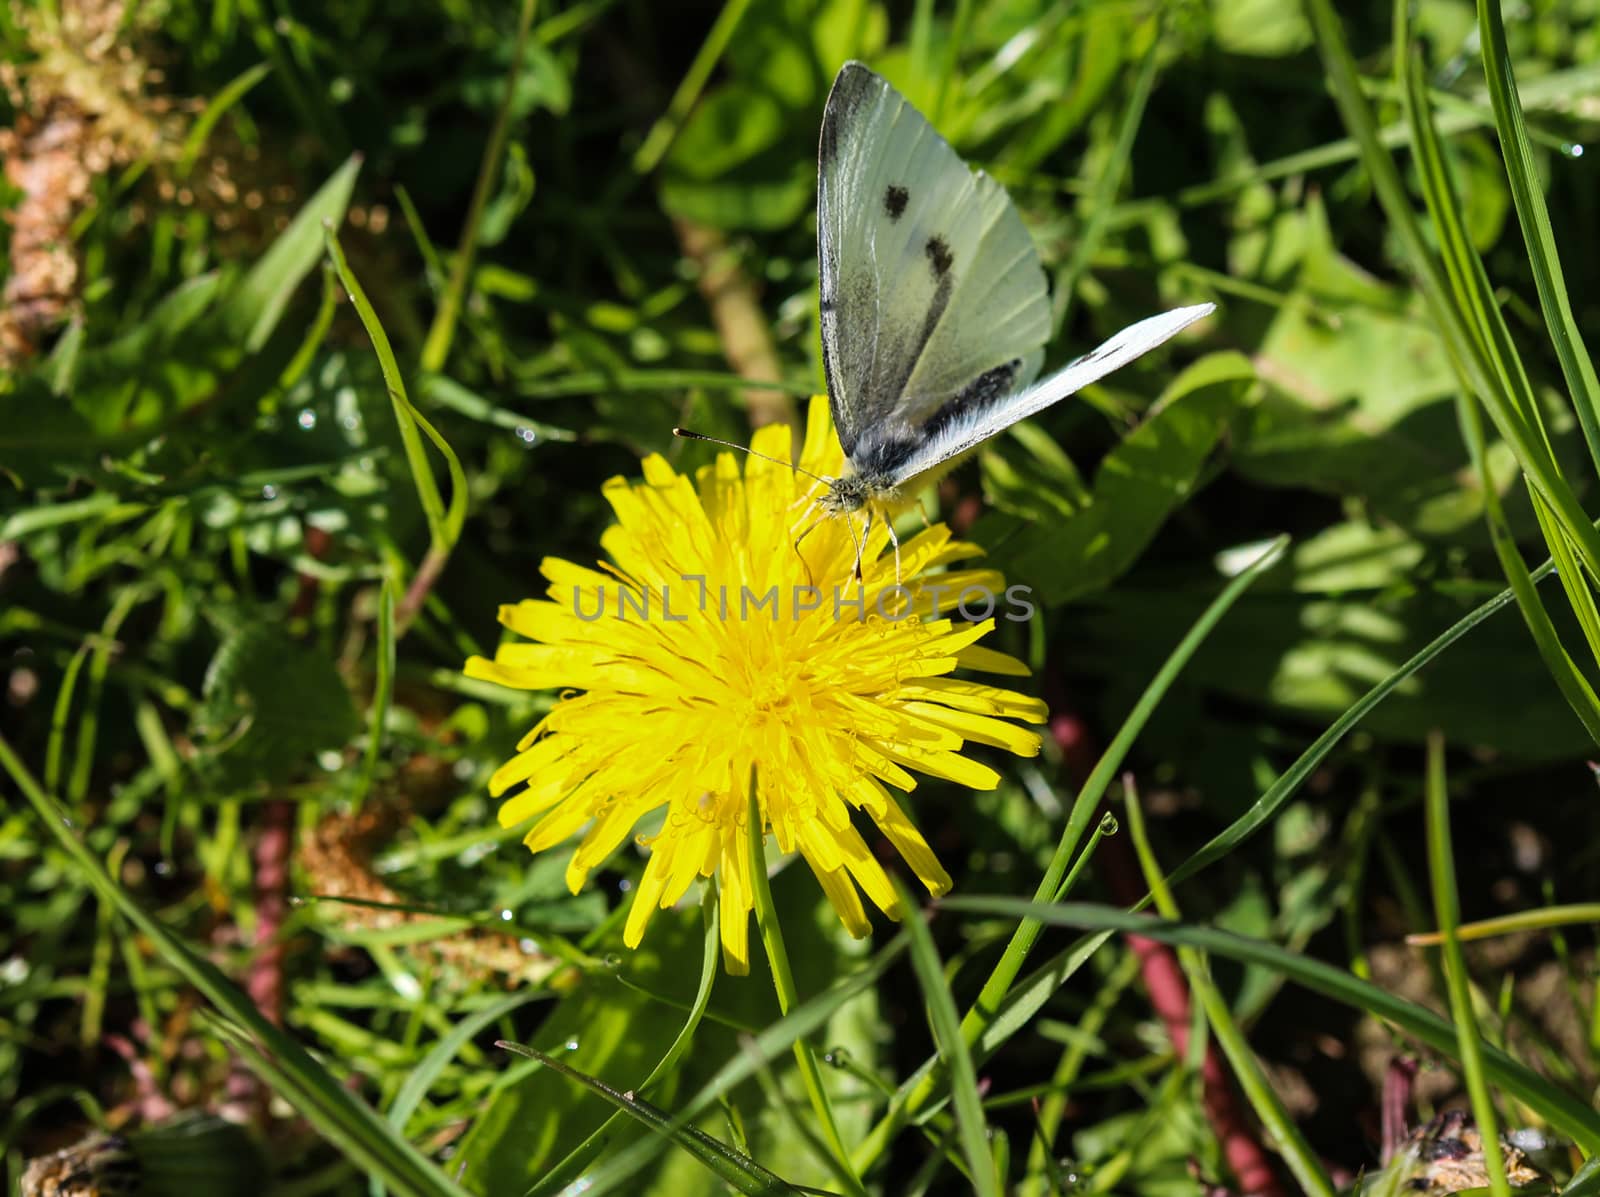 close up of small white butterfly (Pieris rapae) on dandelion